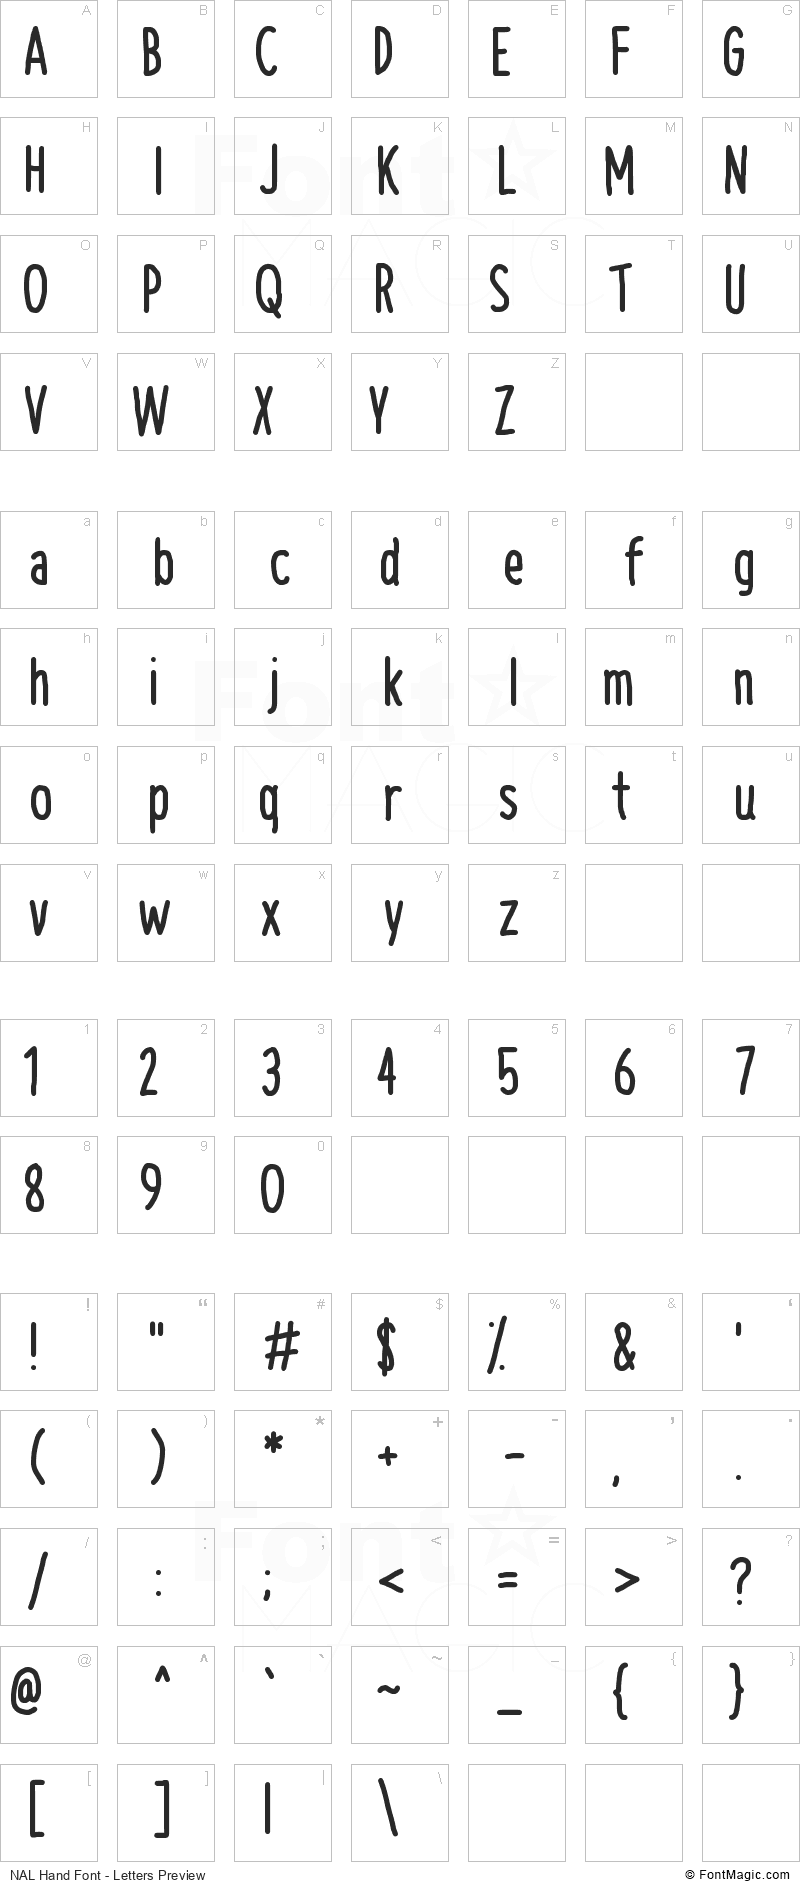 NAL Hand Font - All Latters Preview Chart